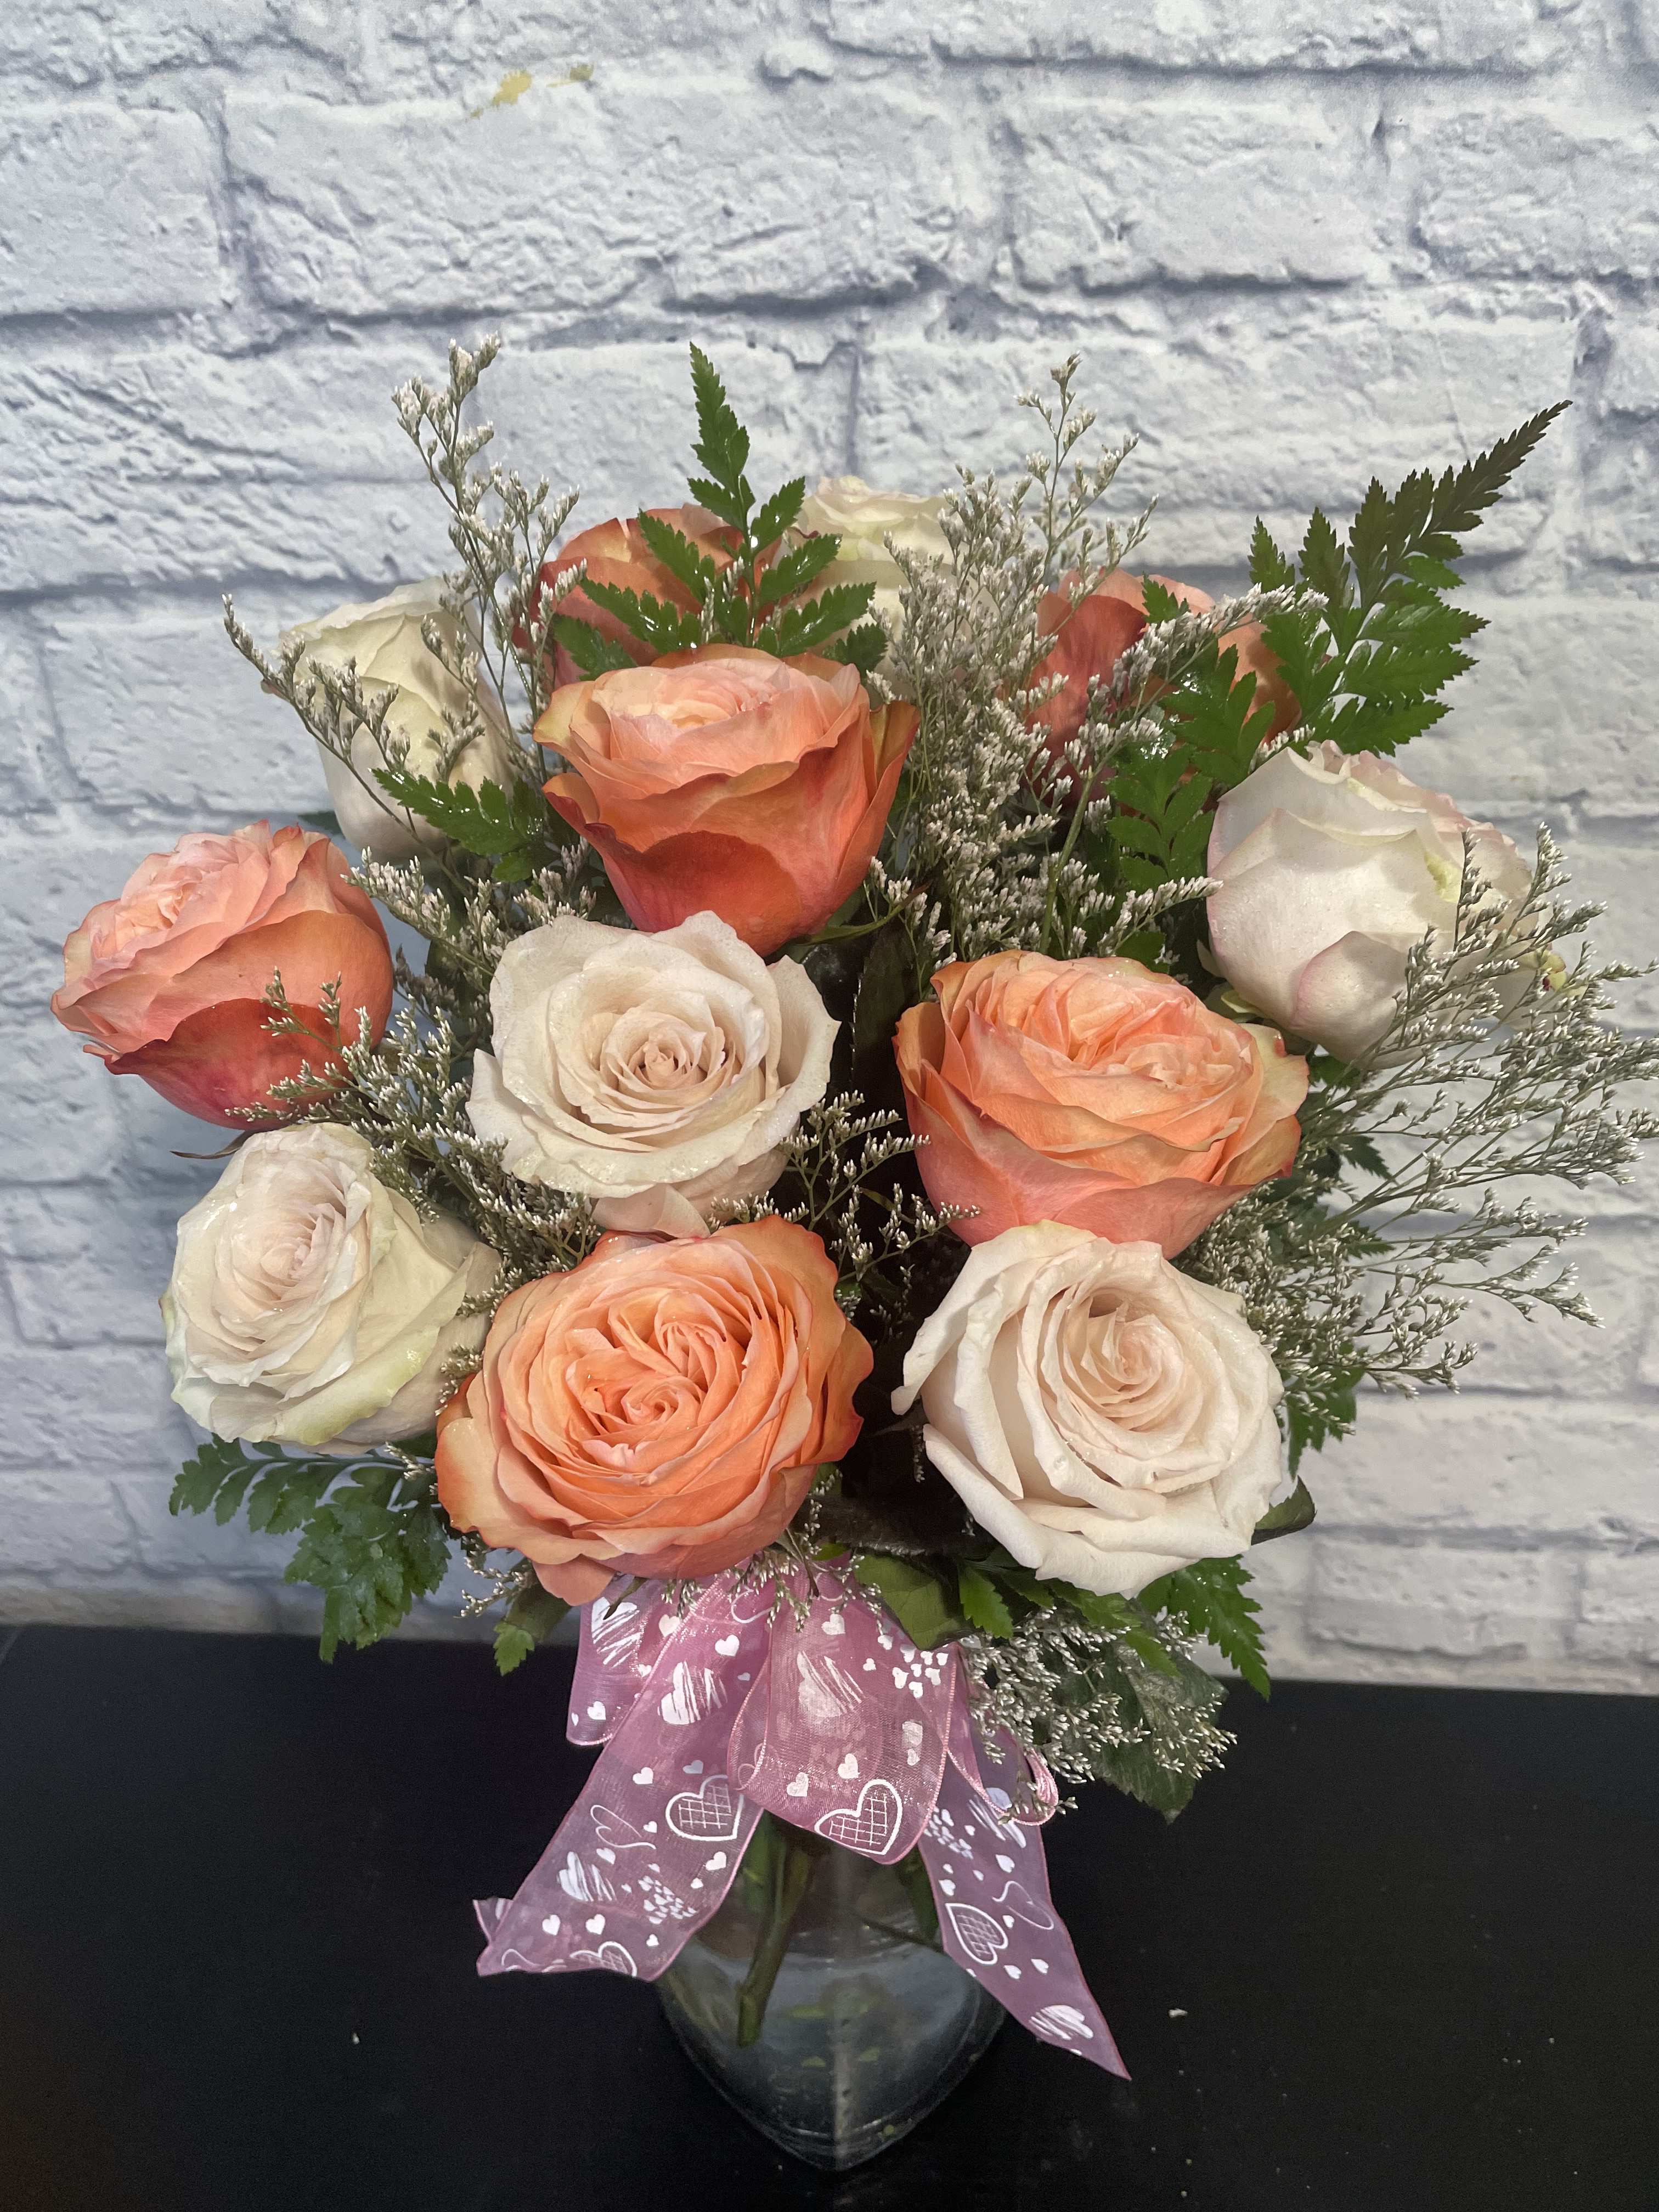 1 dozen asst colors roses - You'll receive a lovely vase filled with 1 dozen (any color roses, NOT RED) with fillers and greenery. A fun surprise for someone who loves roses.